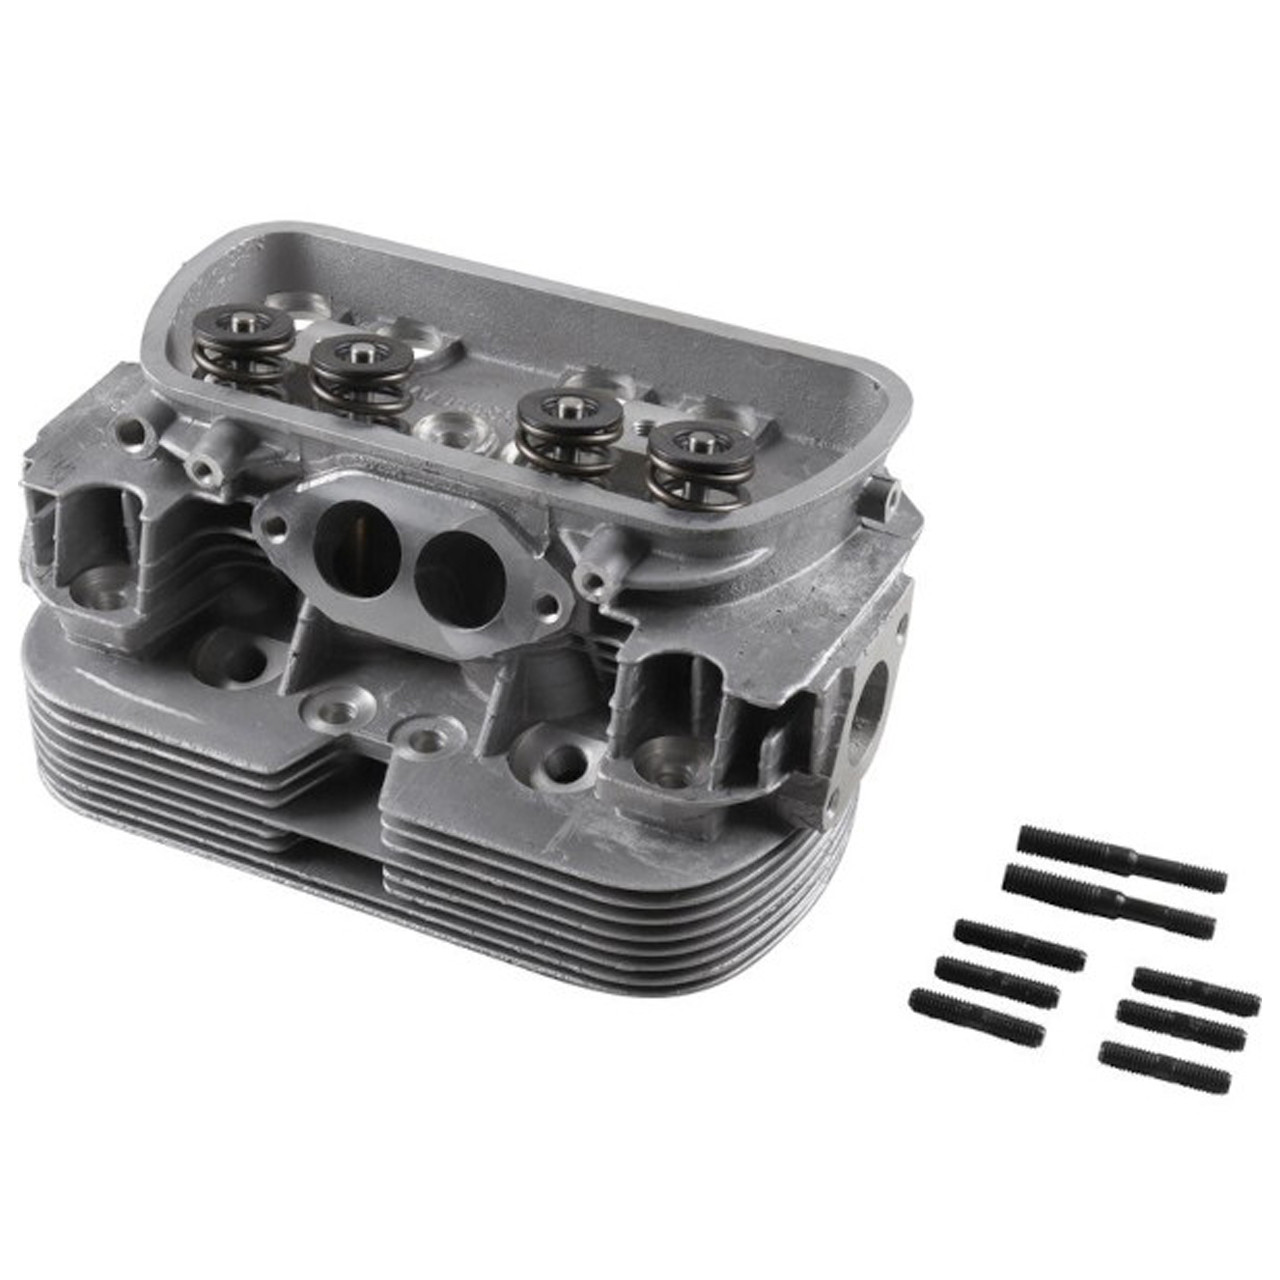 VWC-043-101-355-CK - 043101355C - O.E. BRAND - COMPLETE DUAL PORT CYLINDER  HEAD - WITH 14MM x 1/2 IN. SPARK PLUG HOLE - STOCK 1600CC BEETLE/GHIA 71-79  - BUS 1971 (WITH F/I SENSOR BOSS) - SOLD EACH